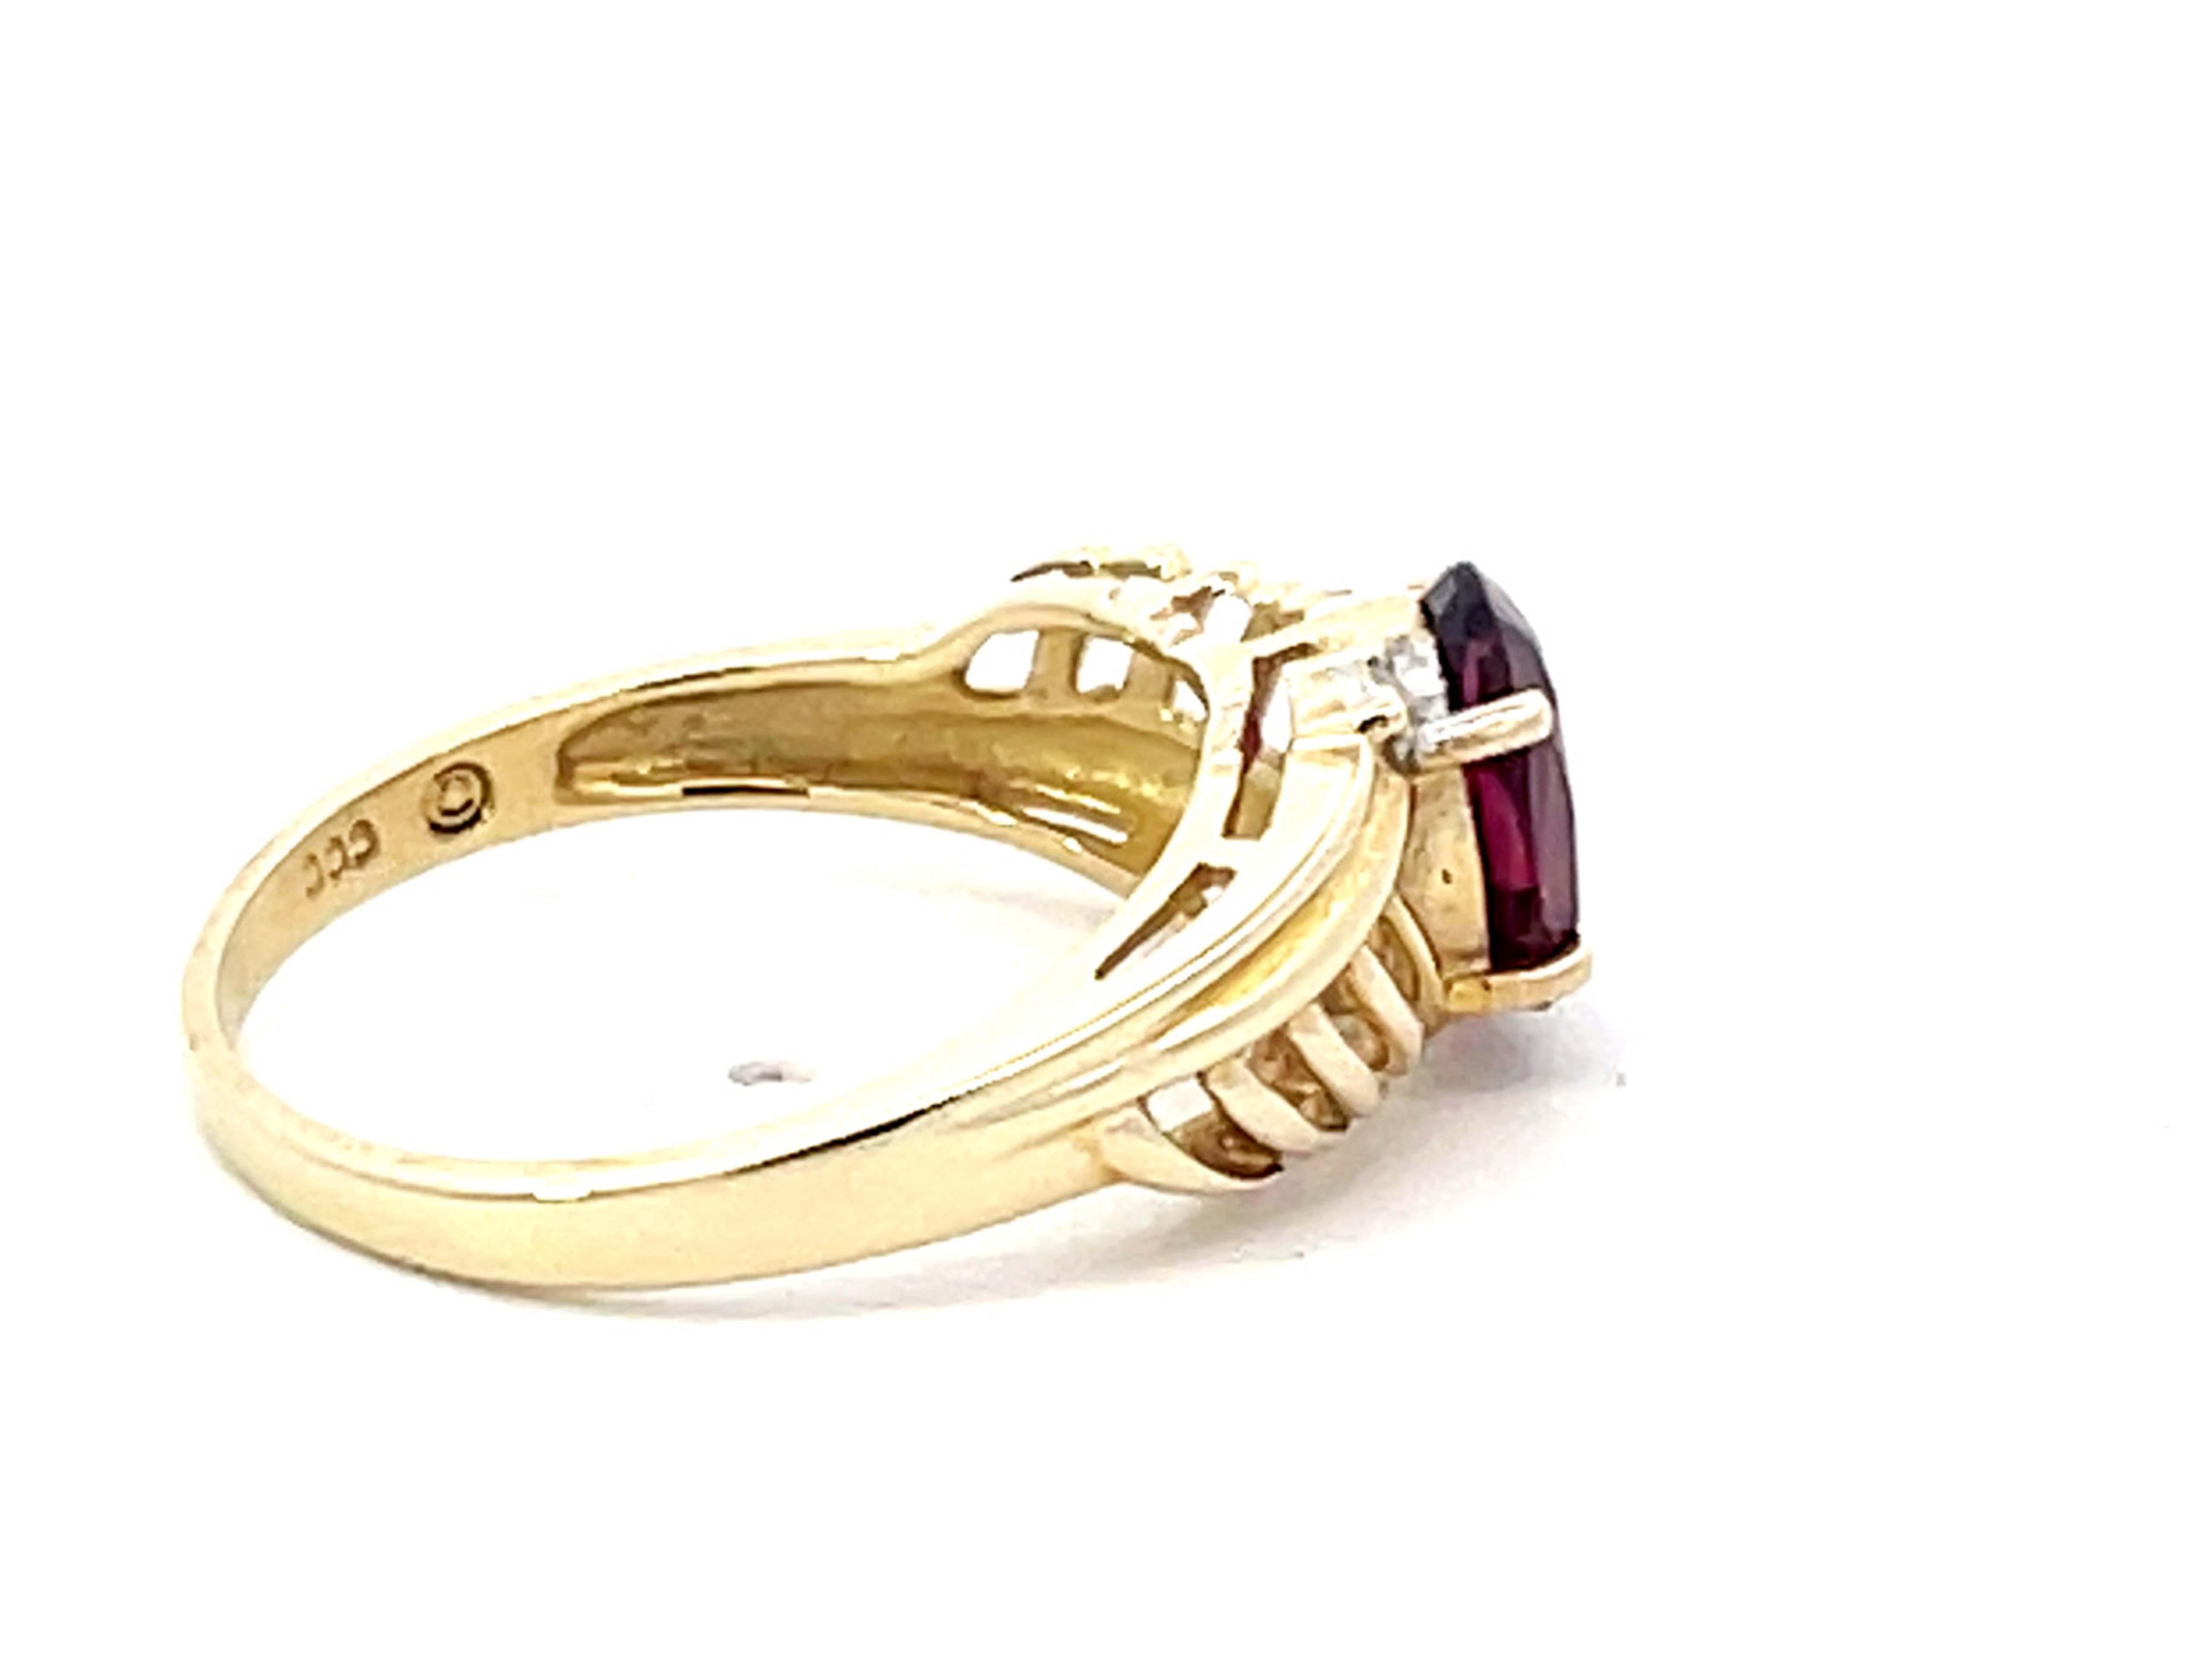 Red Rubellite Garnet and Diamond Ring in 14k Yellow Gold In Excellent Condition For Sale In Honolulu, HI